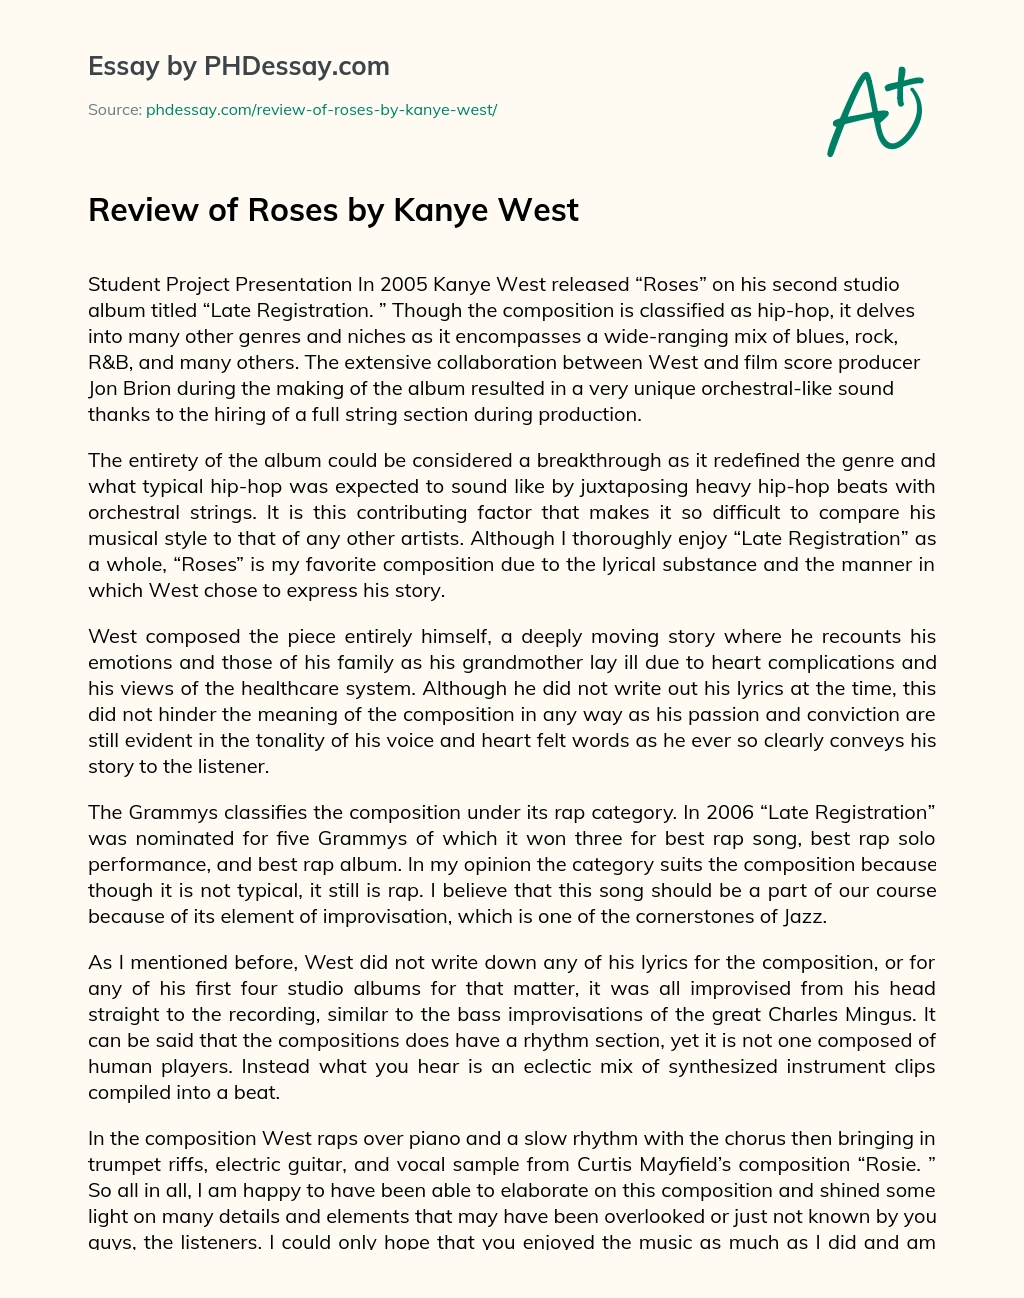 Review of Roses by Kanye West essay